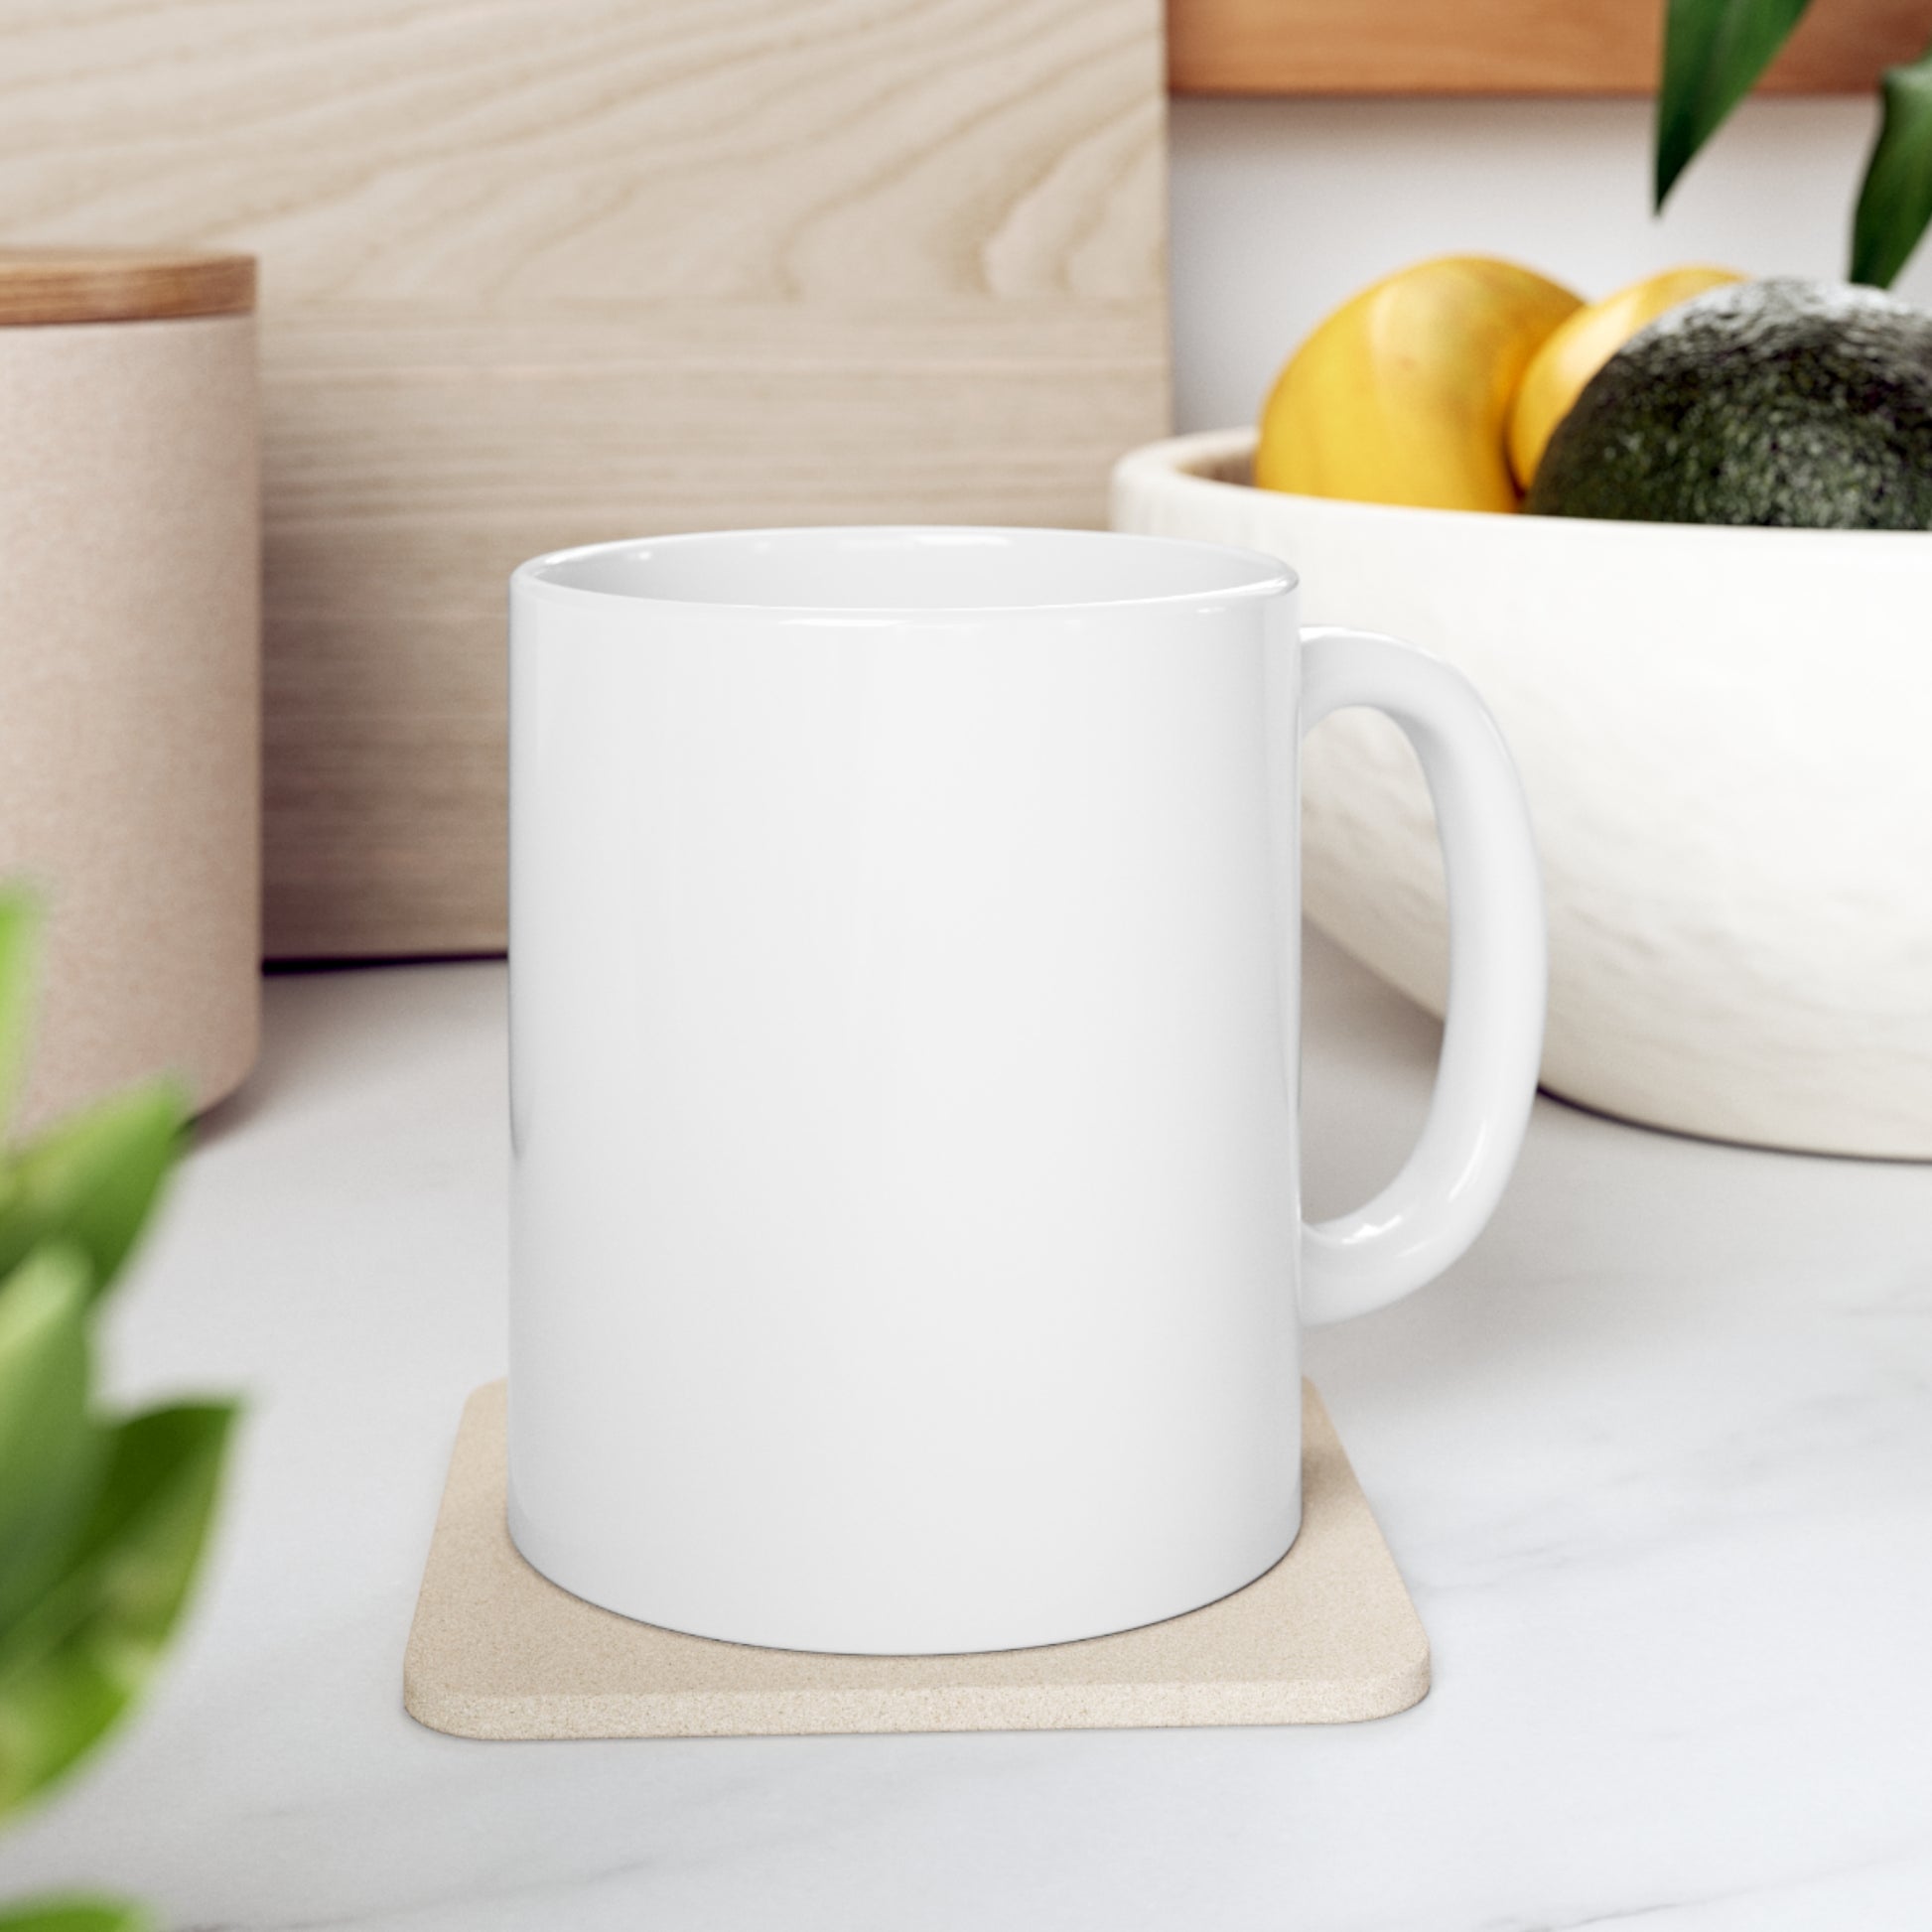 "Quitter" Coffee Mug - Weave Got Gifts - Unique Gifts You Won’t Find Anywhere Else!